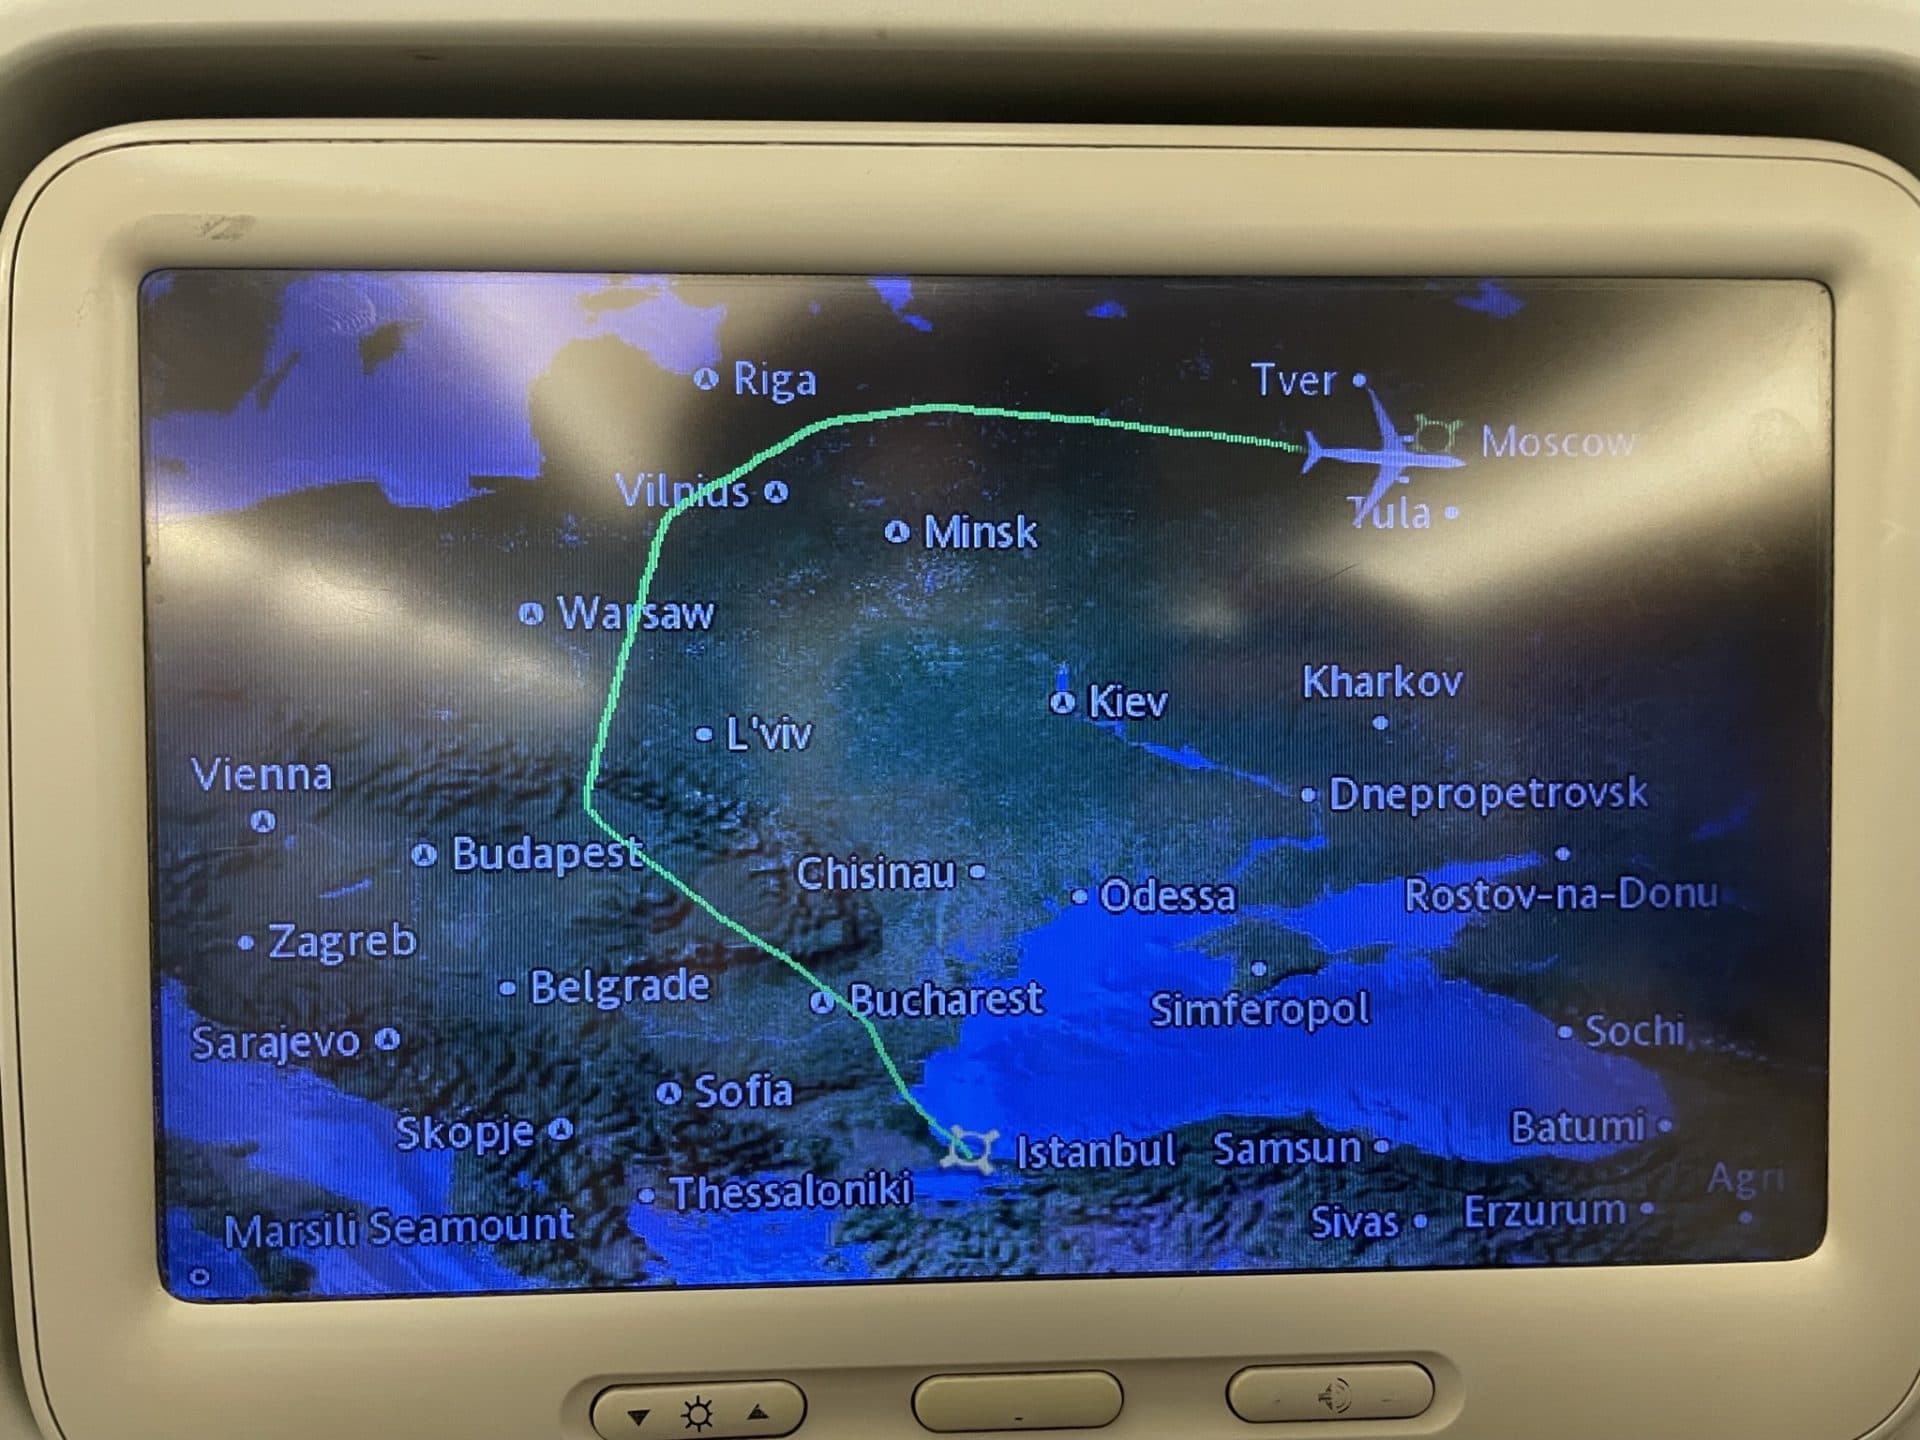 On the way from Istanbul to Moscow, Kronrod's seat-back monitor depicts his flight path foregoing the projected route straight to Moscow, instead routing around Ukraine, on the day Russia invaded the country. (Courtesy Yakov Kronrod)